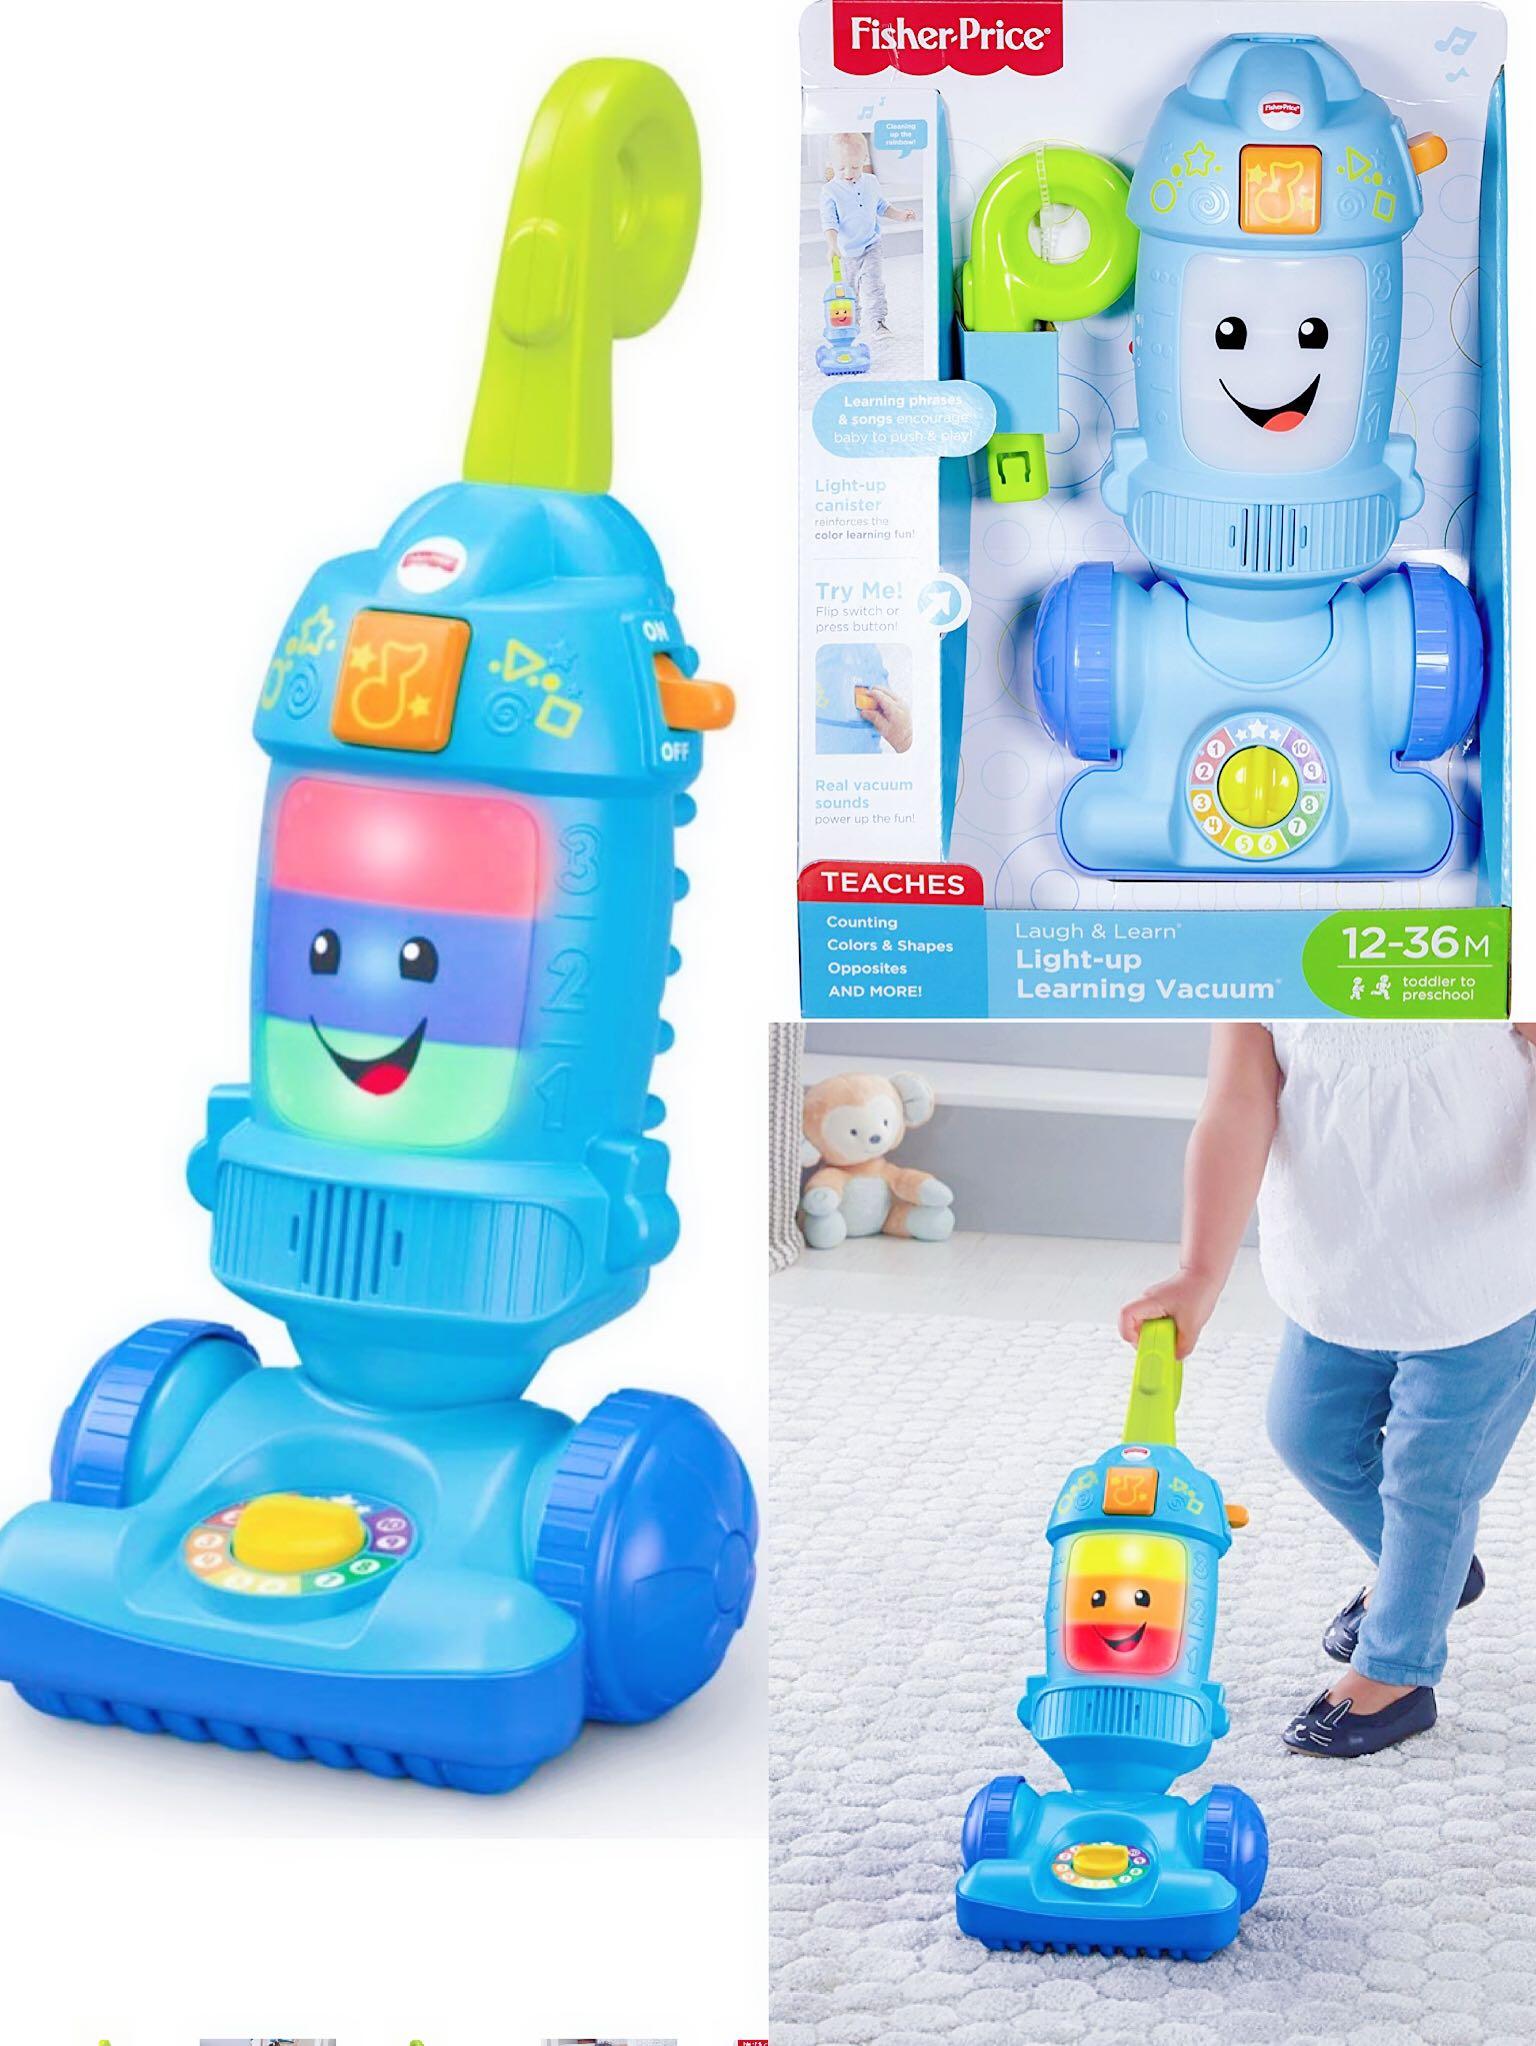 Baby and Toddler Push Toy Fisher-Price Laugh Light-up Learning Vacuum 